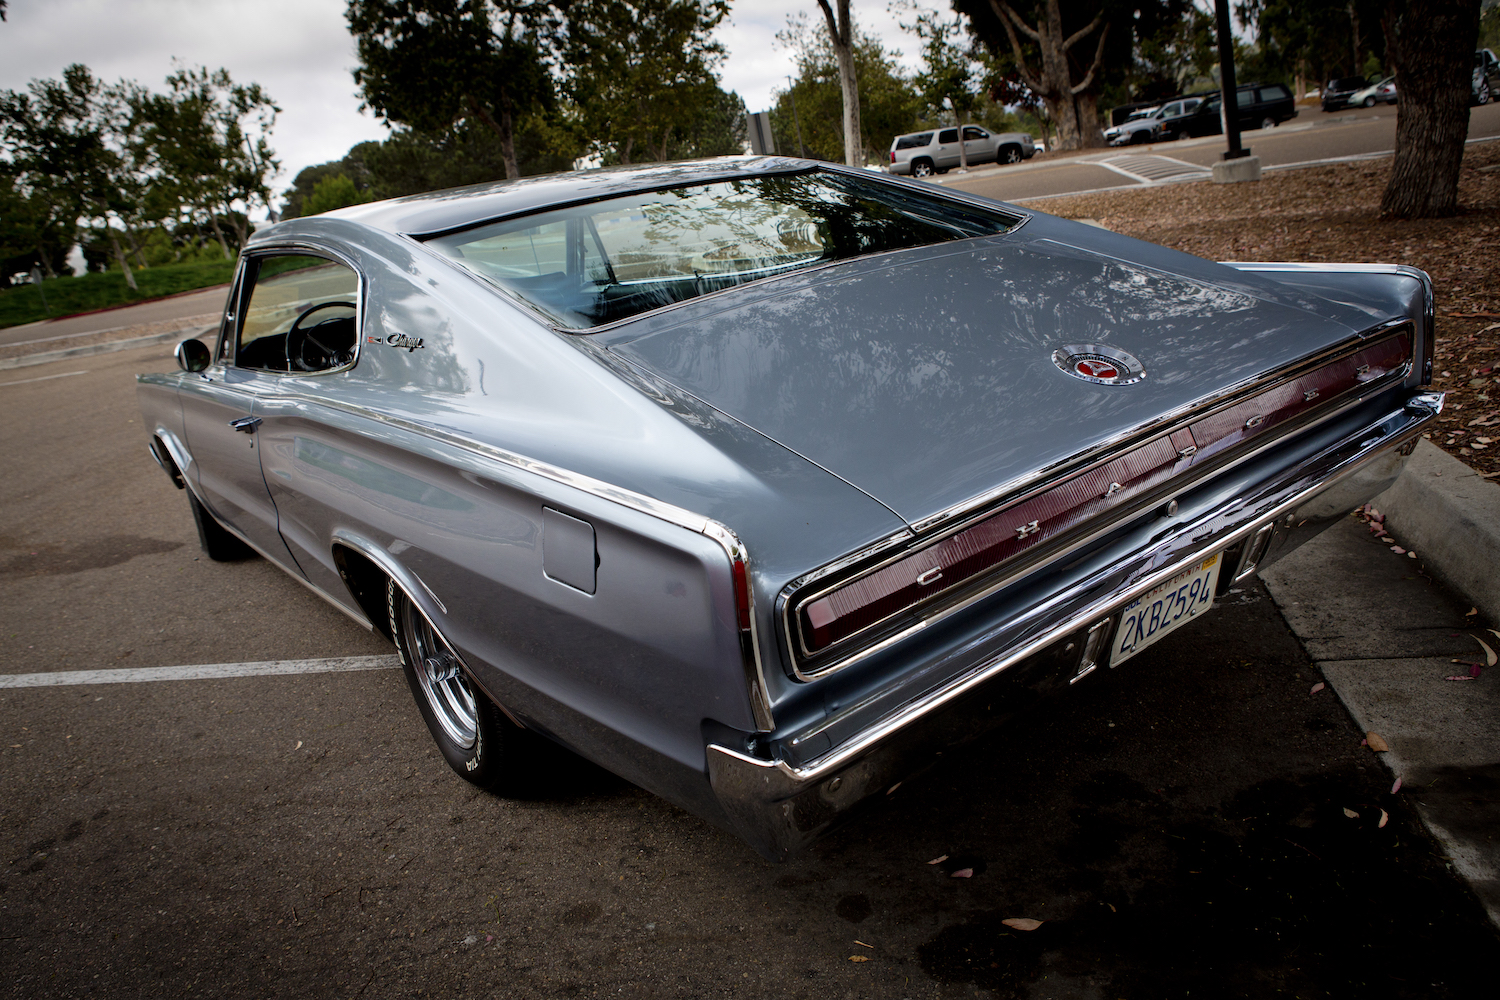 This is a photo of a 1967 "first generation" Dodge Charger in a parking lot. Dom's first Charger is revealed in Fast and Furious 9 as a 1966 first-generation Dodge Charger. Dünzl\ullstein bild via Getty Images